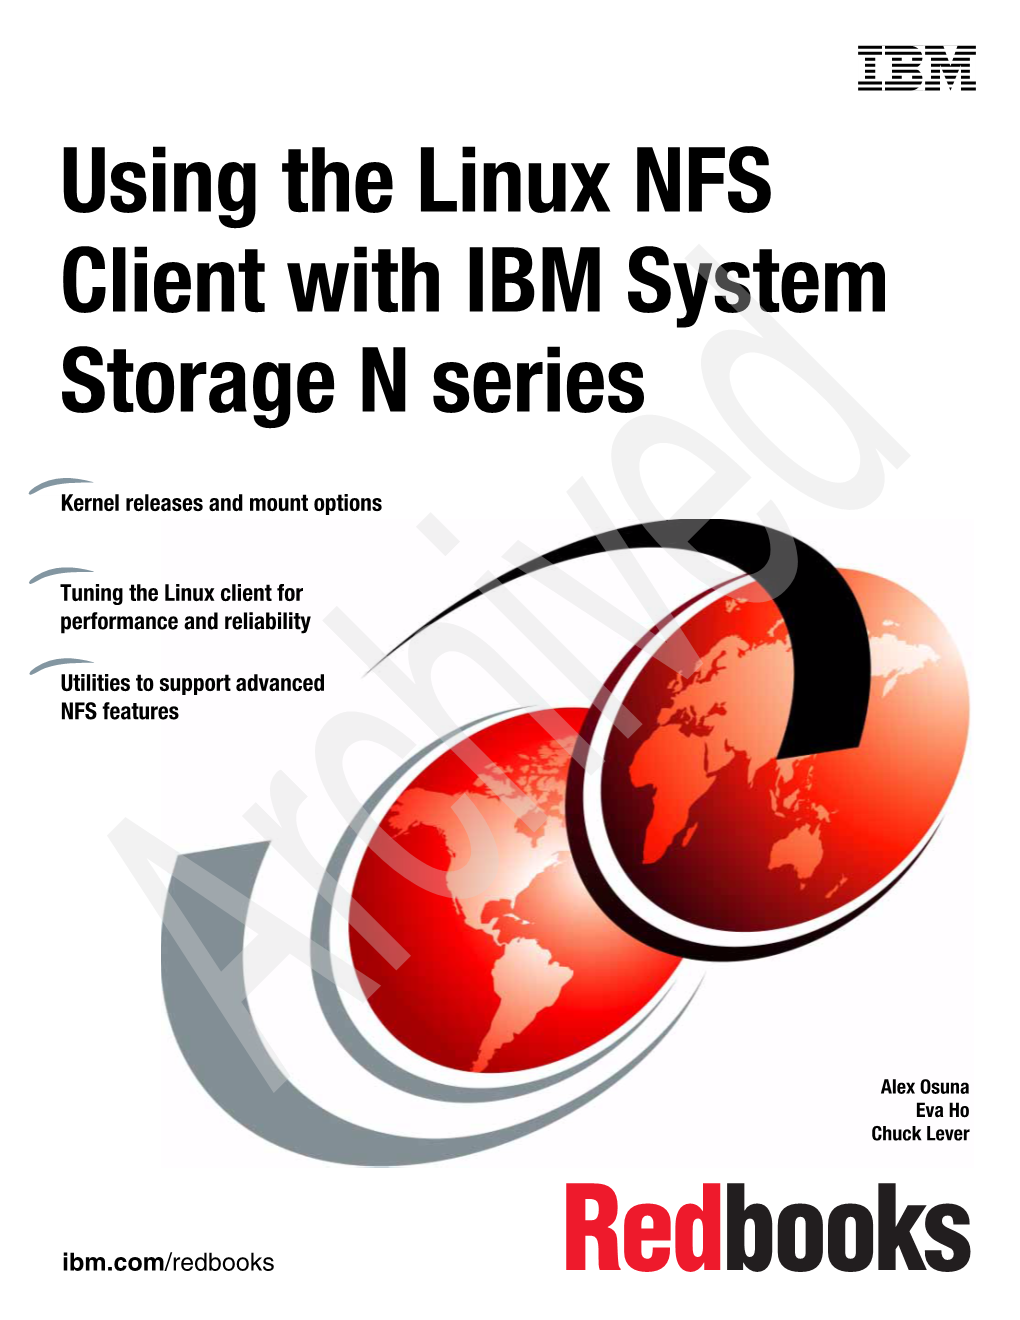 Using the Linux NFS Client with IBM System Storage N Series